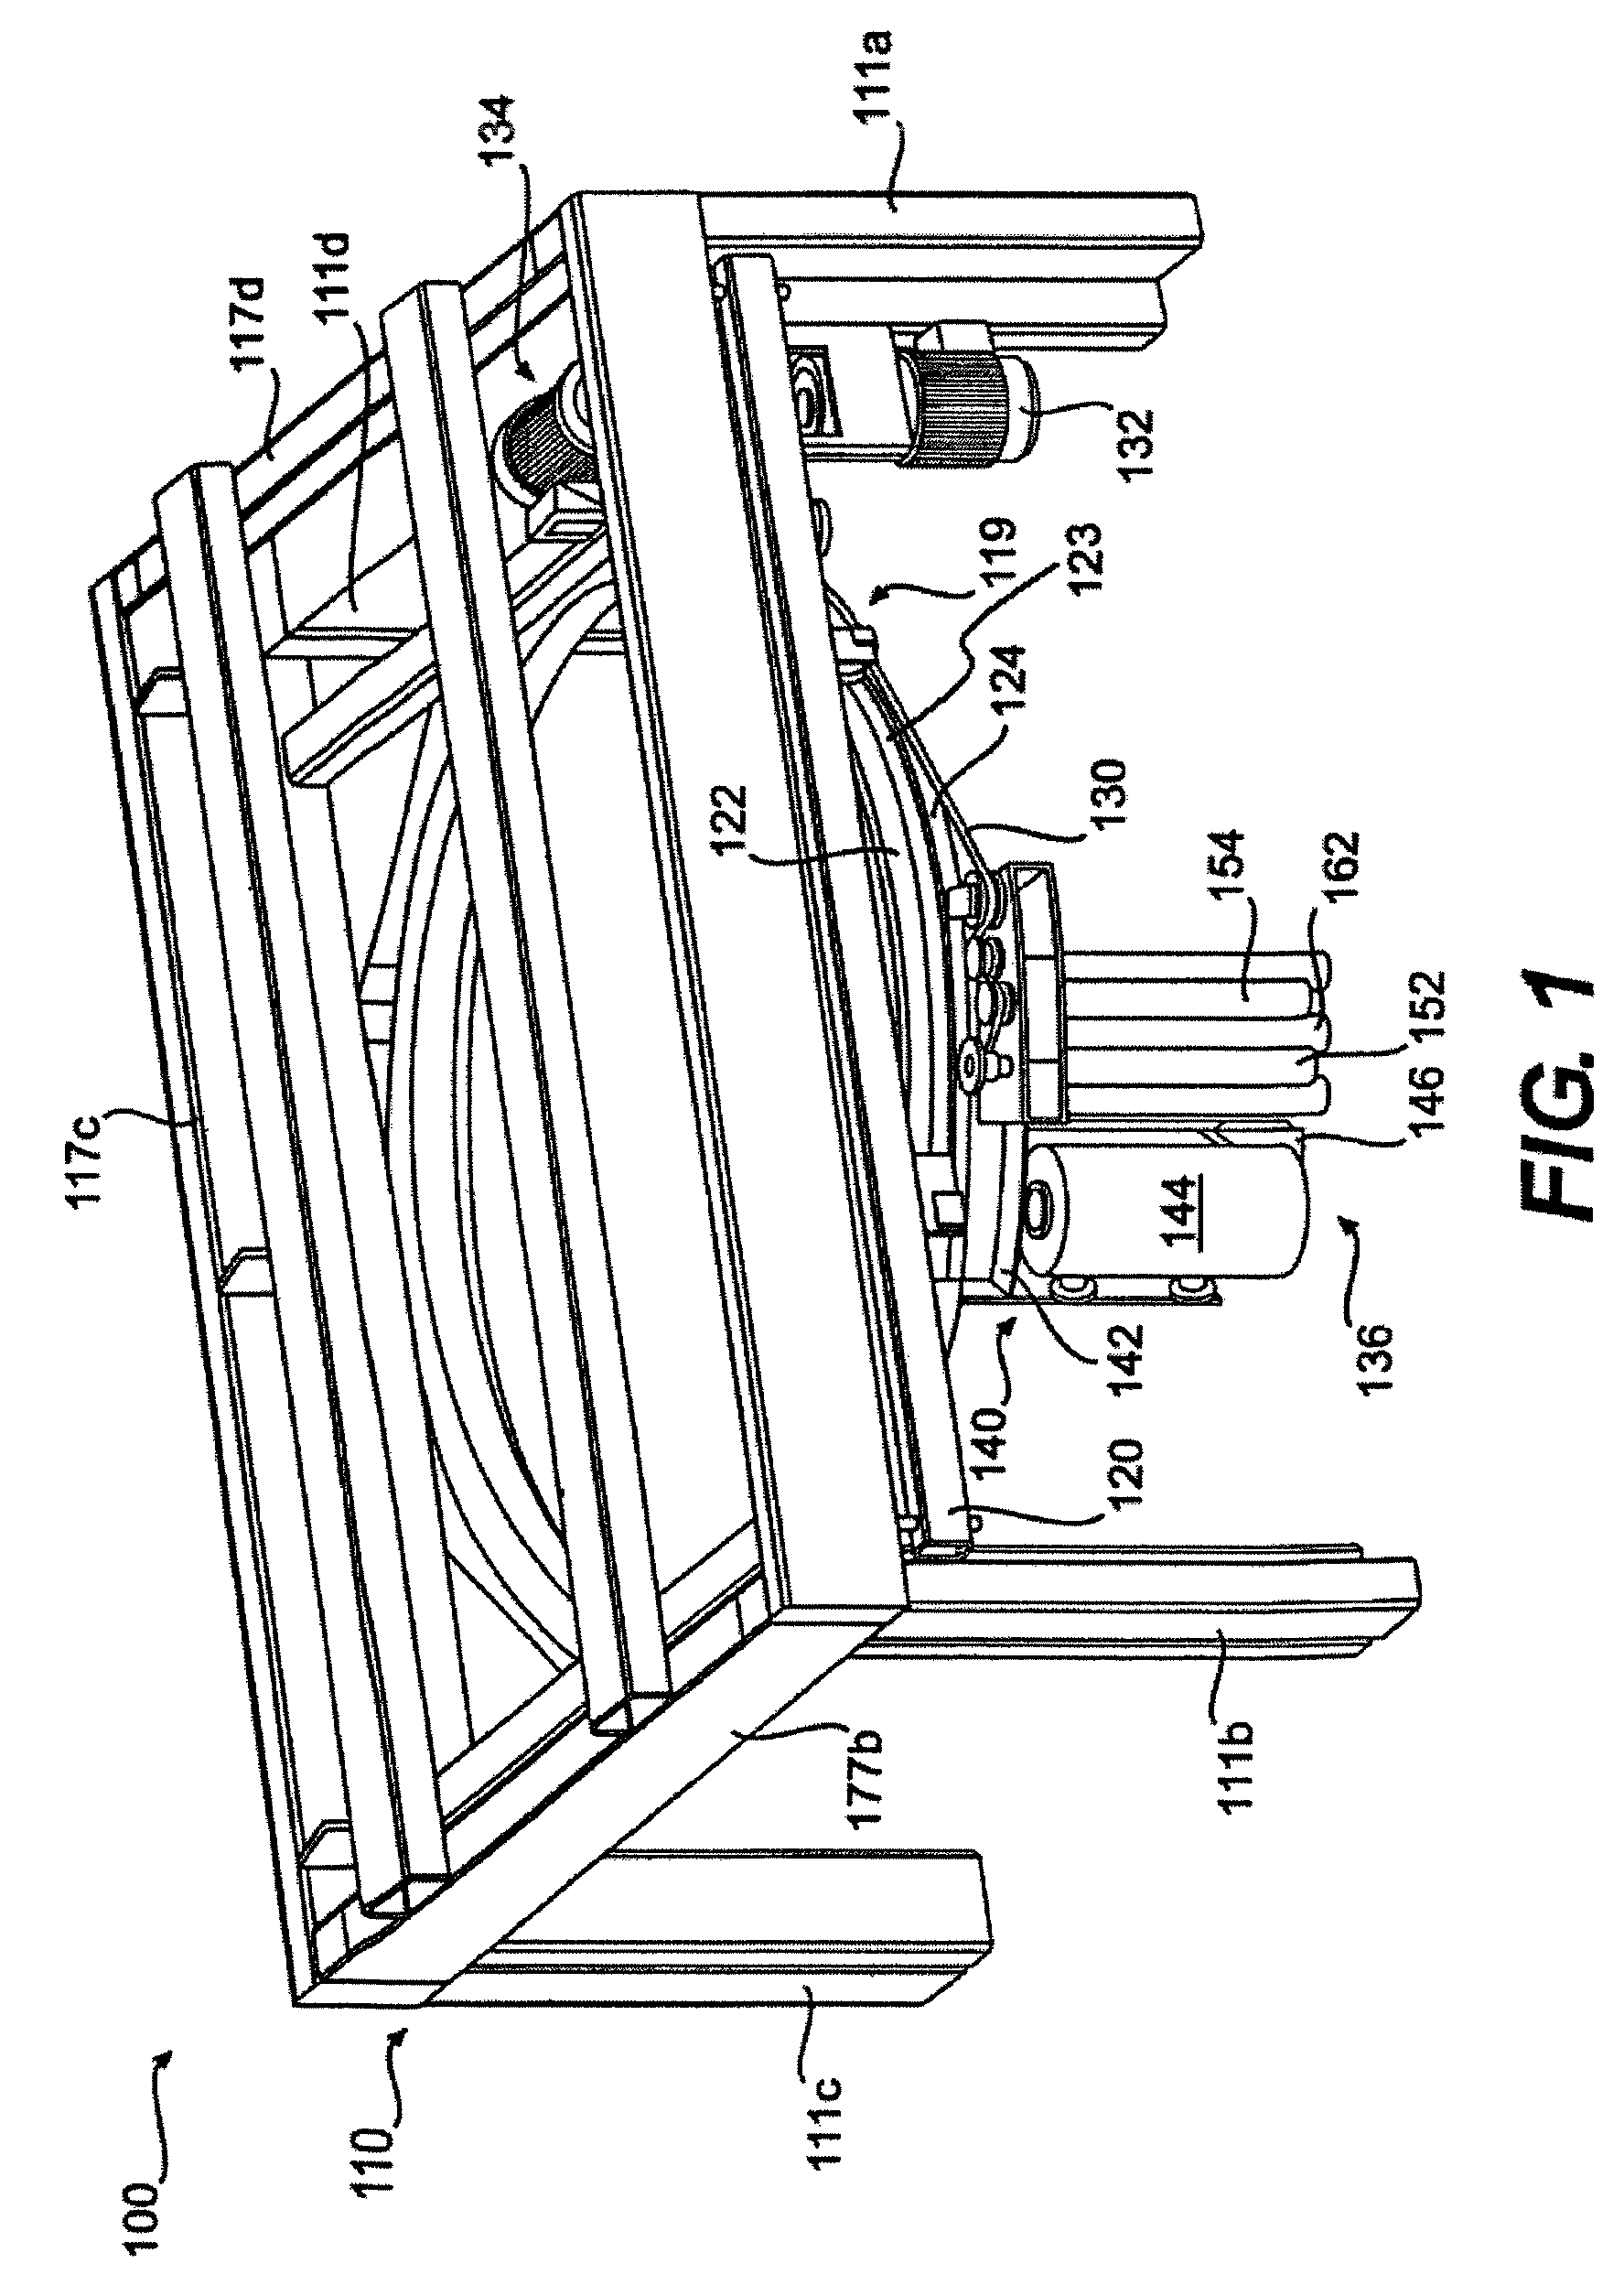 Method for dispensing a predetermined amount of film relative to load girth